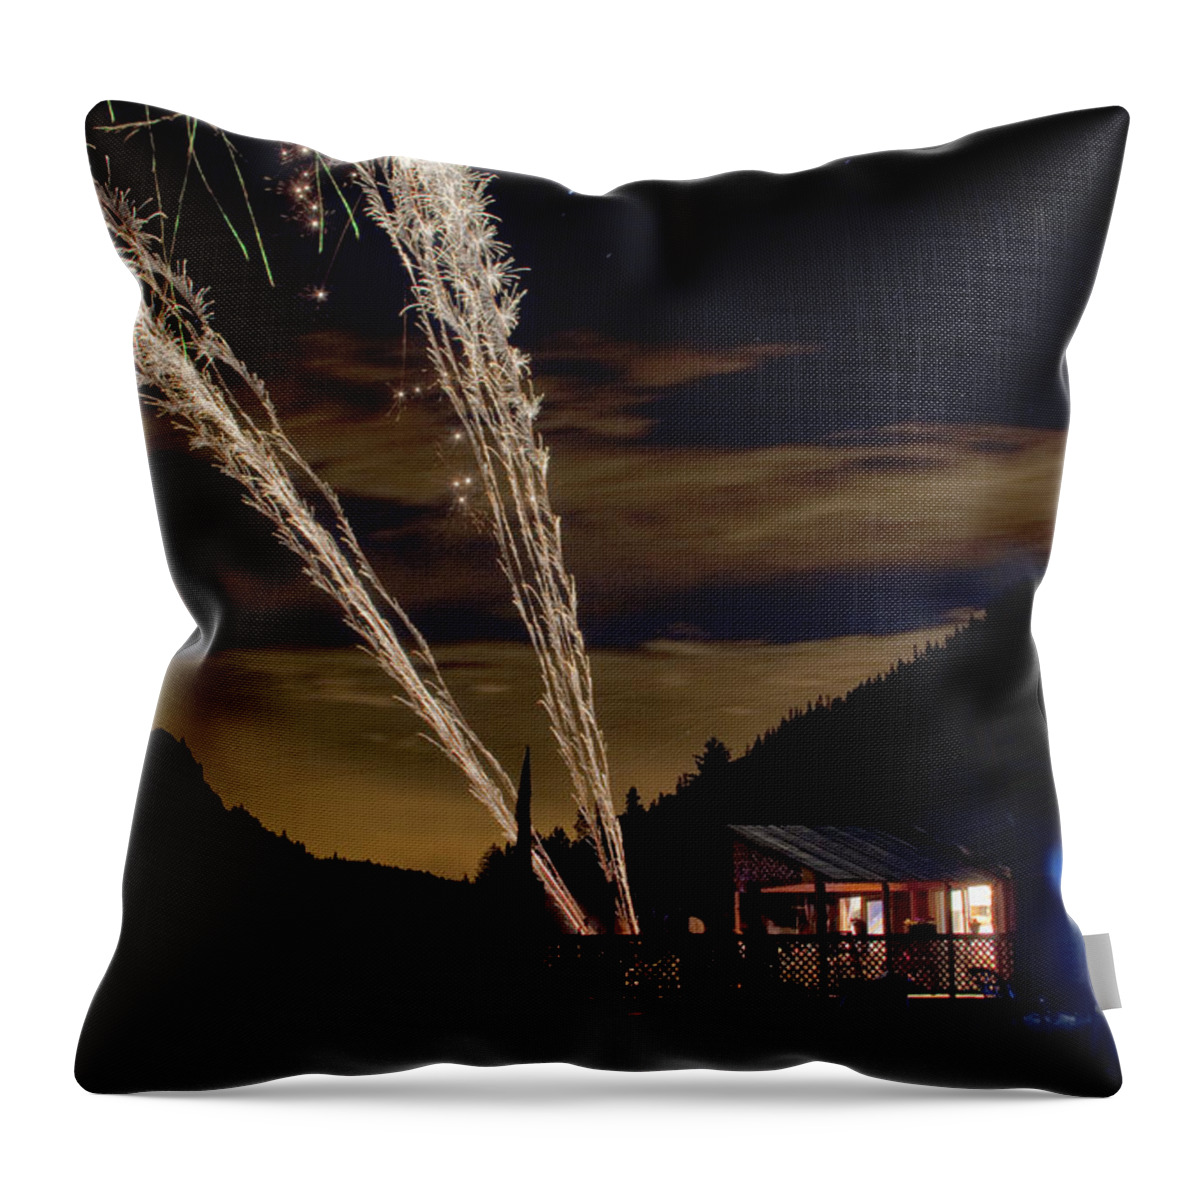 Fireworks Throw Pillow featuring the photograph Magic Mountain by James BO Insogna